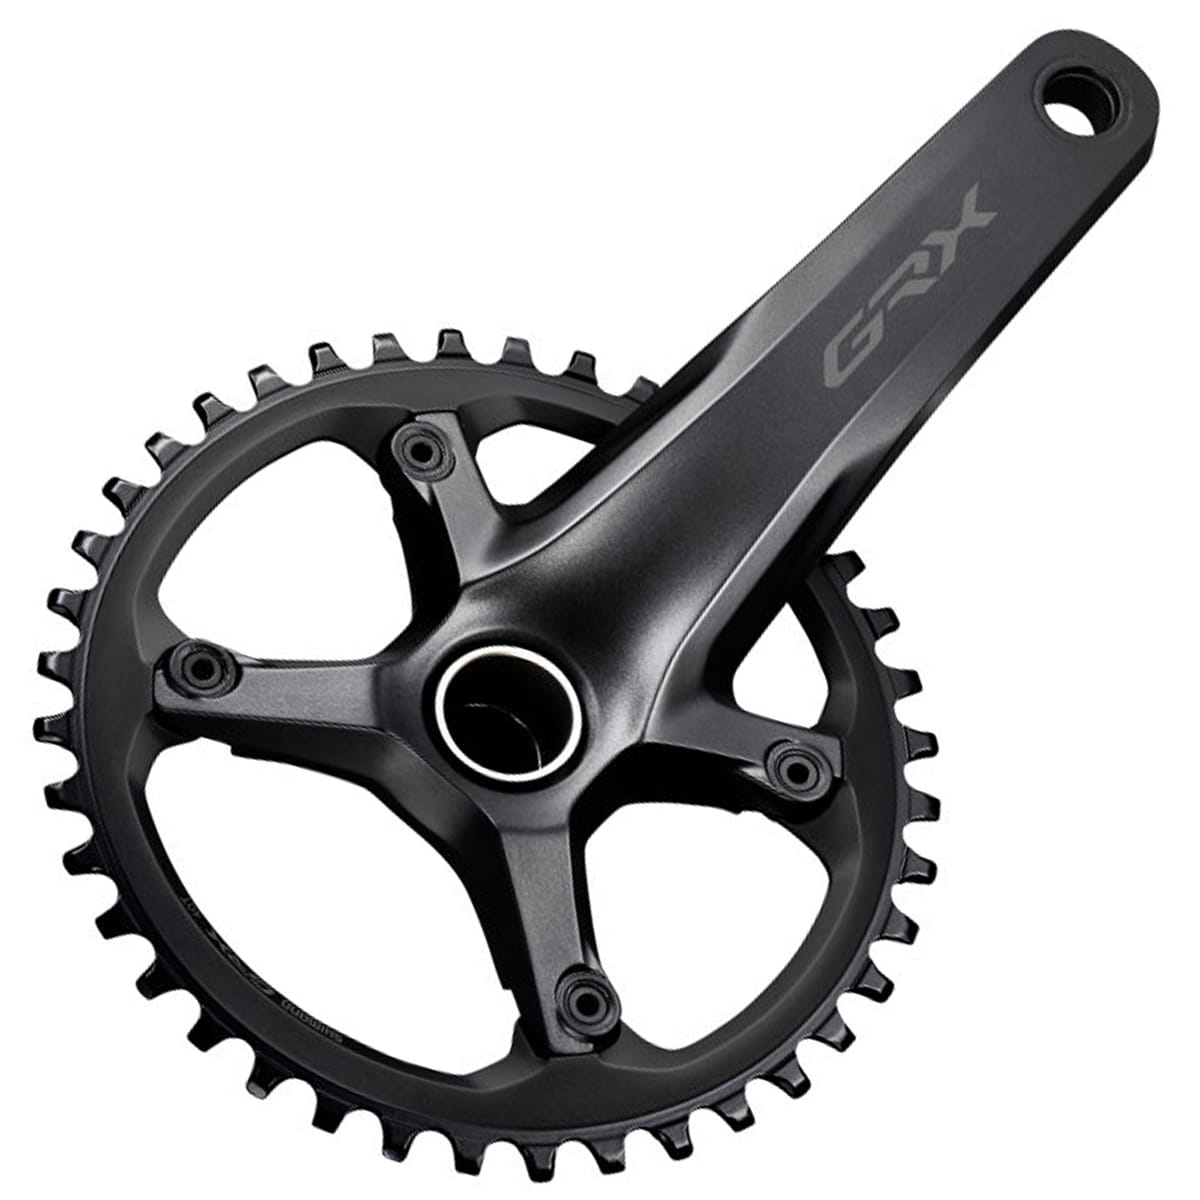 shimano rx600 groupset